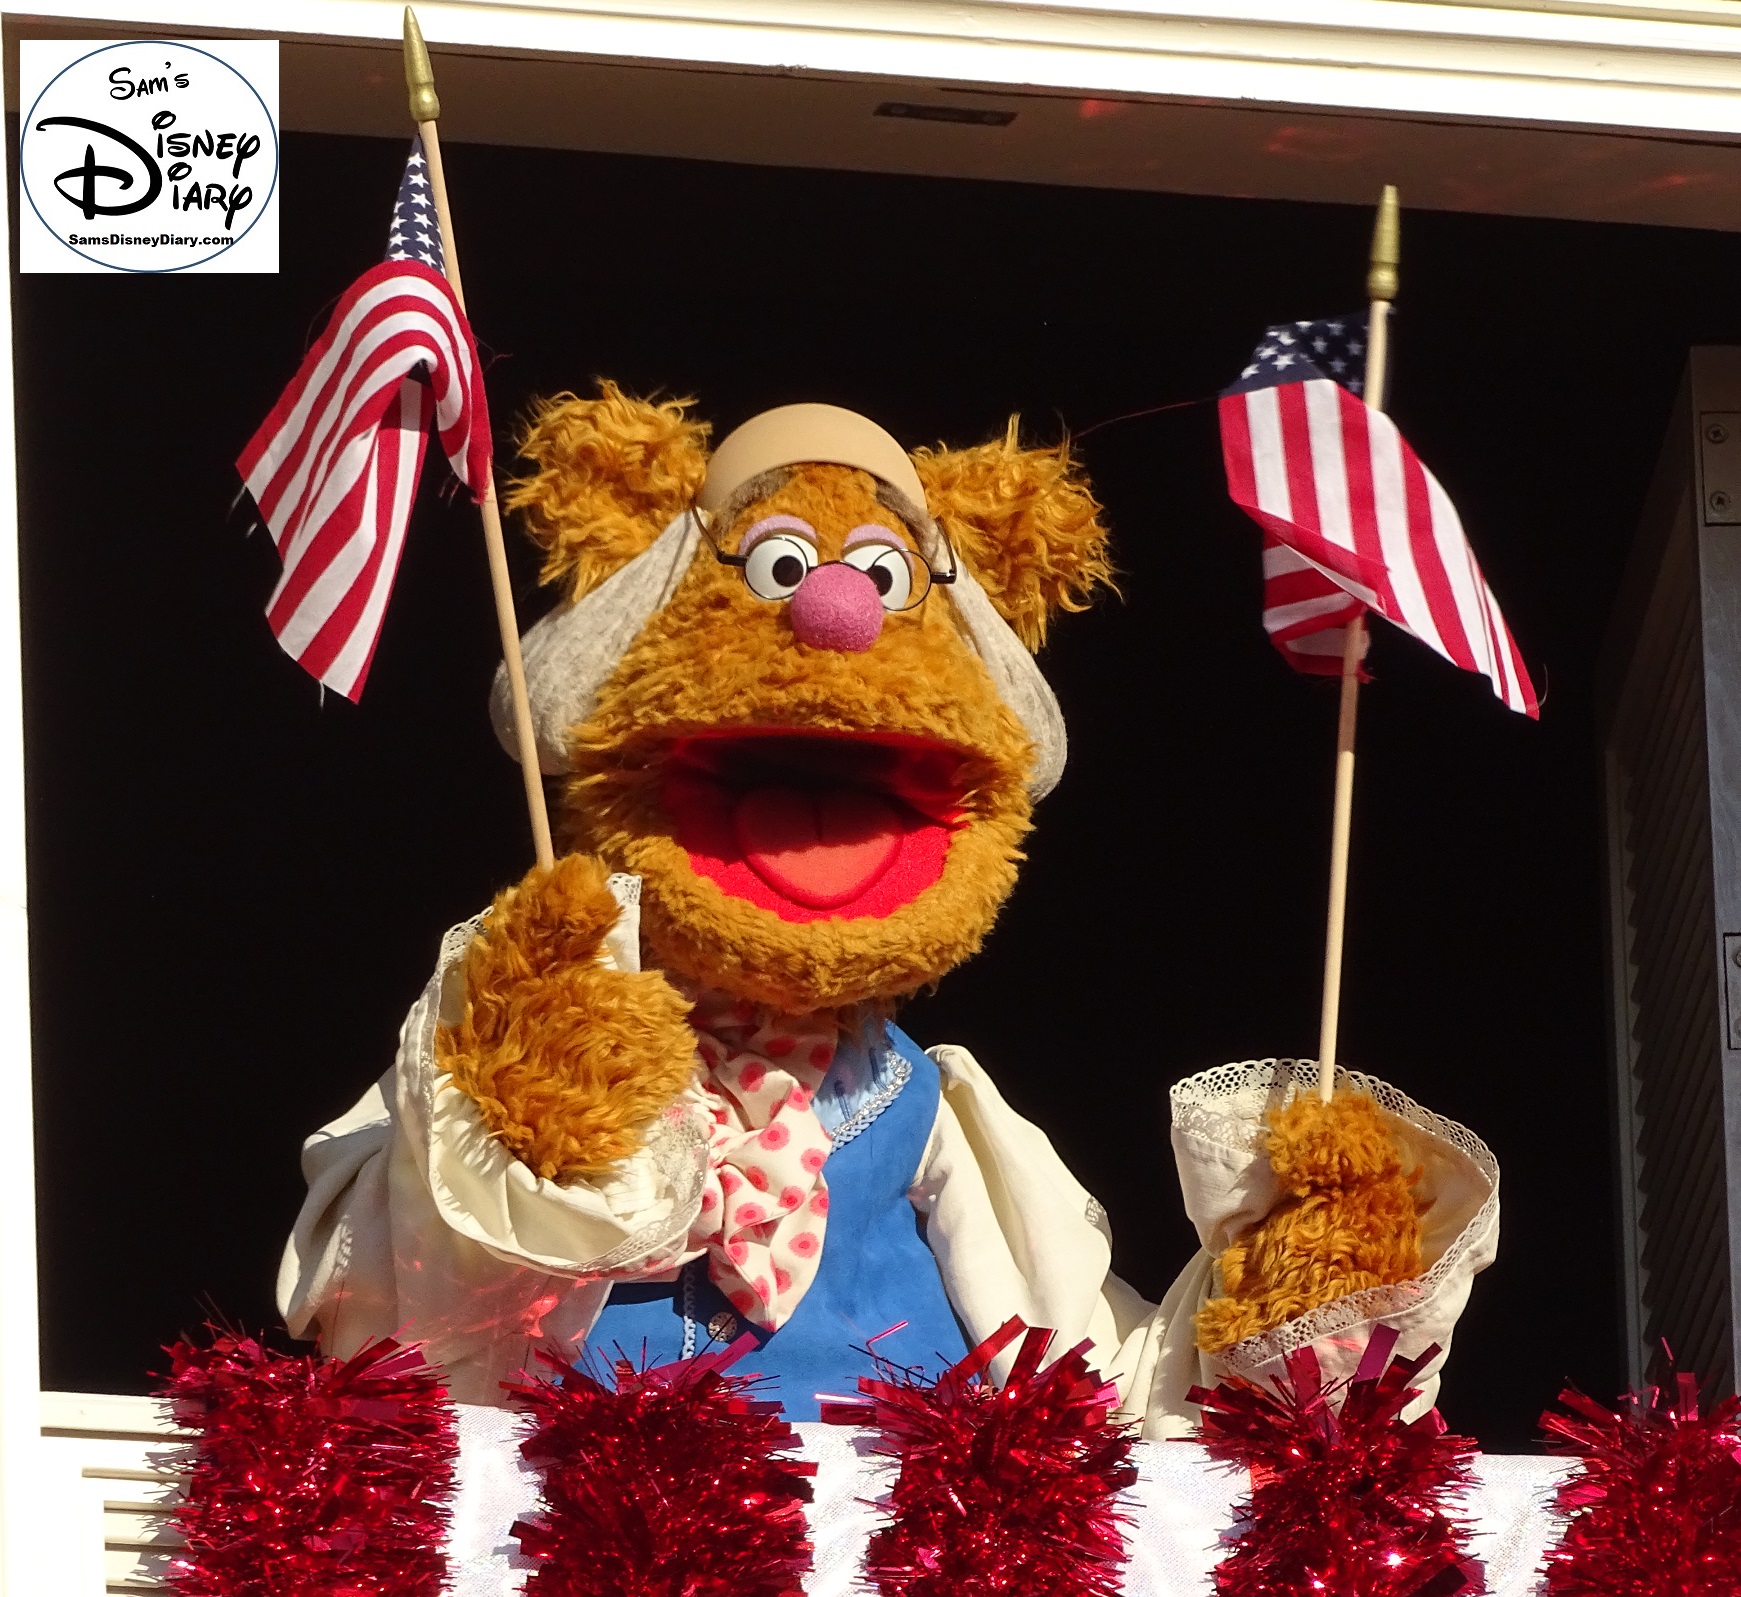 SamsDisneyDiary Episode #75 - The Muppets present Great Moments in American History. Fozzie Bear performs during Great Moments in American History